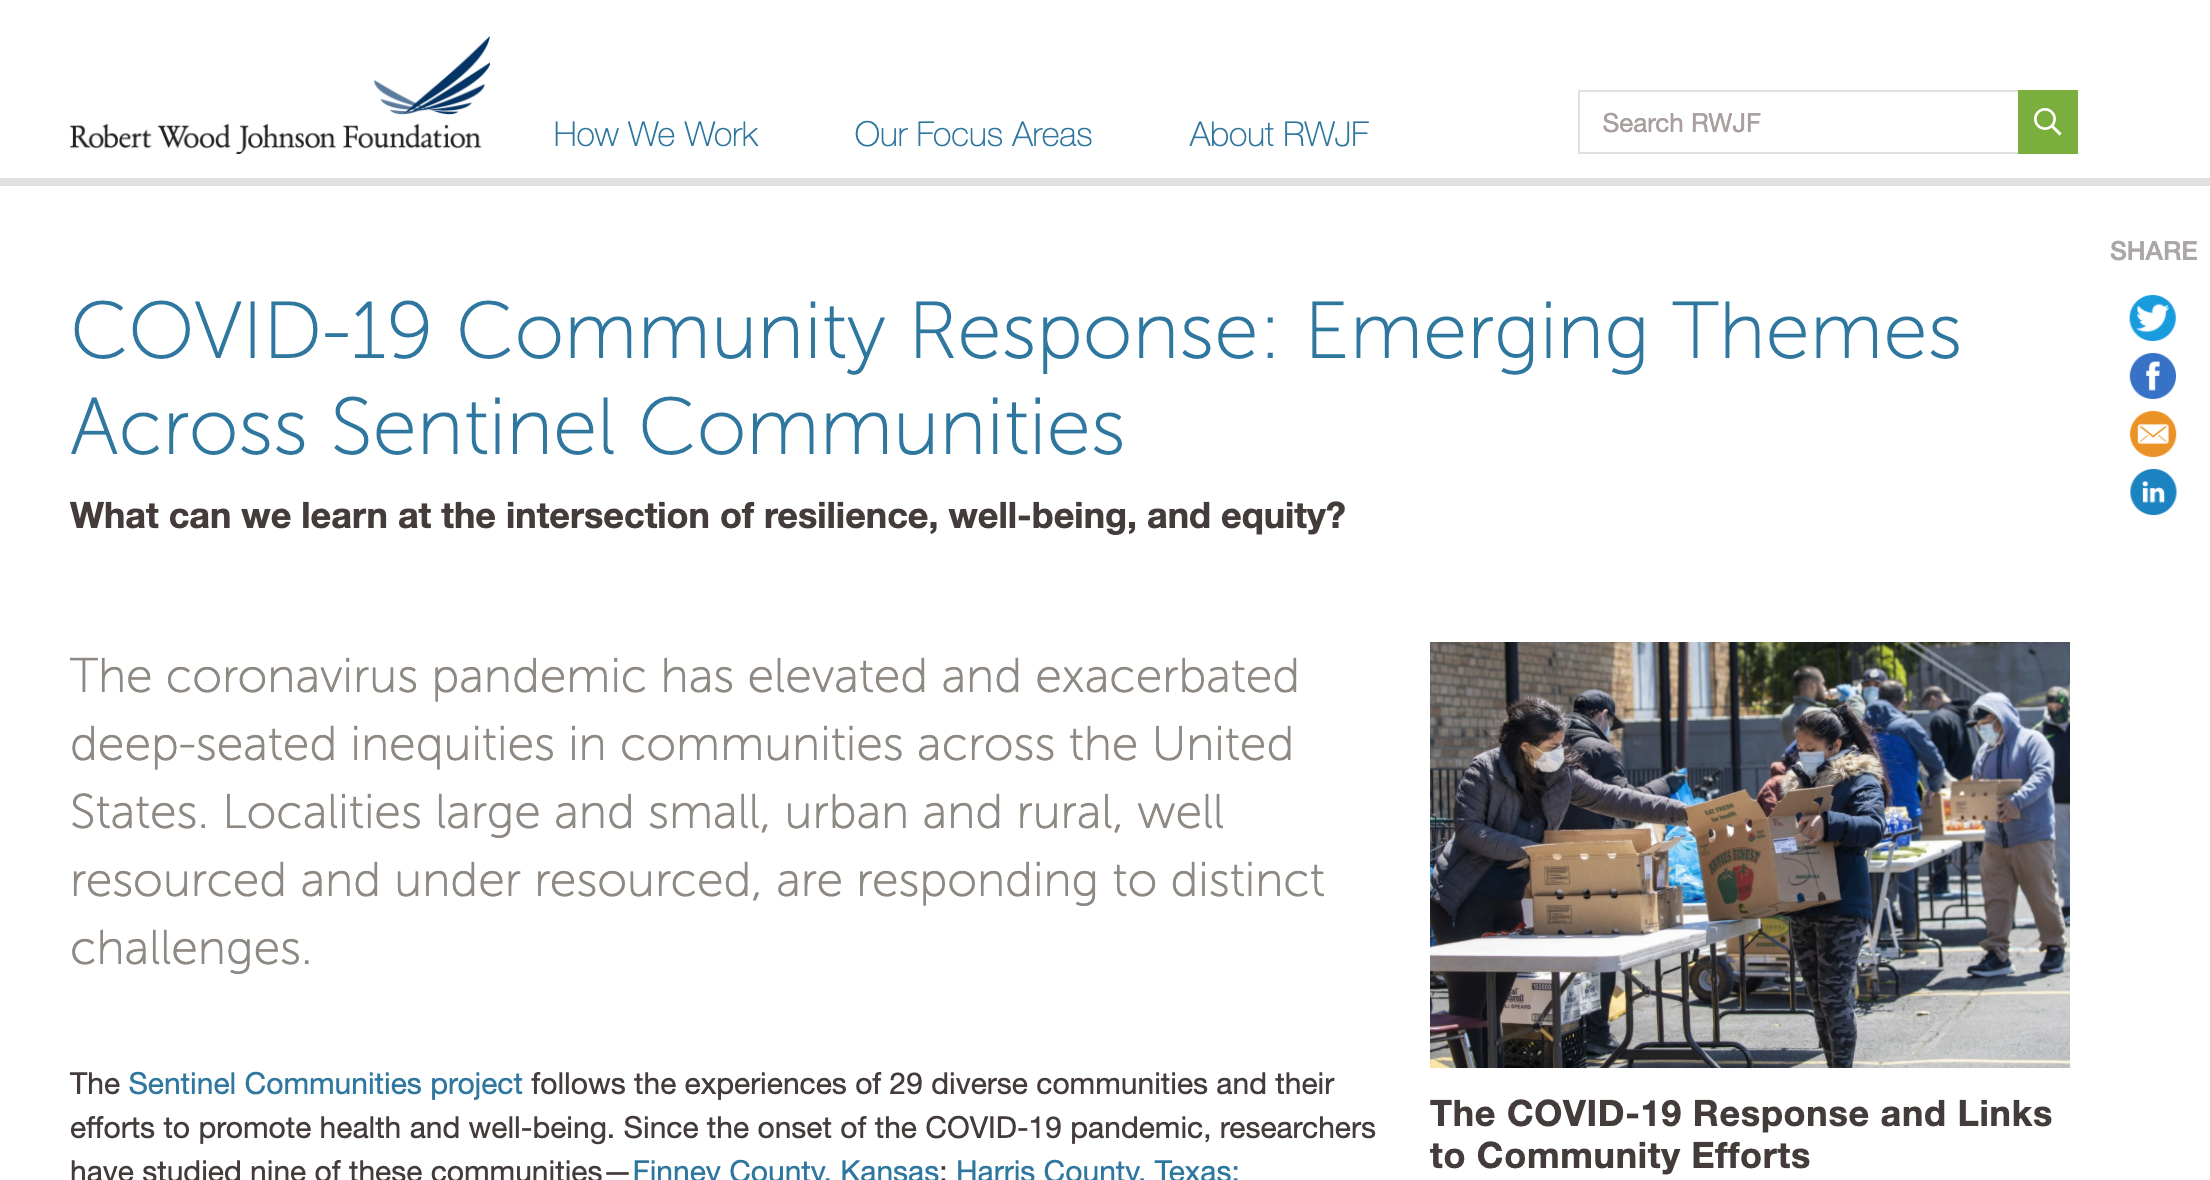 Collaboration in Communities to Address COVID-19